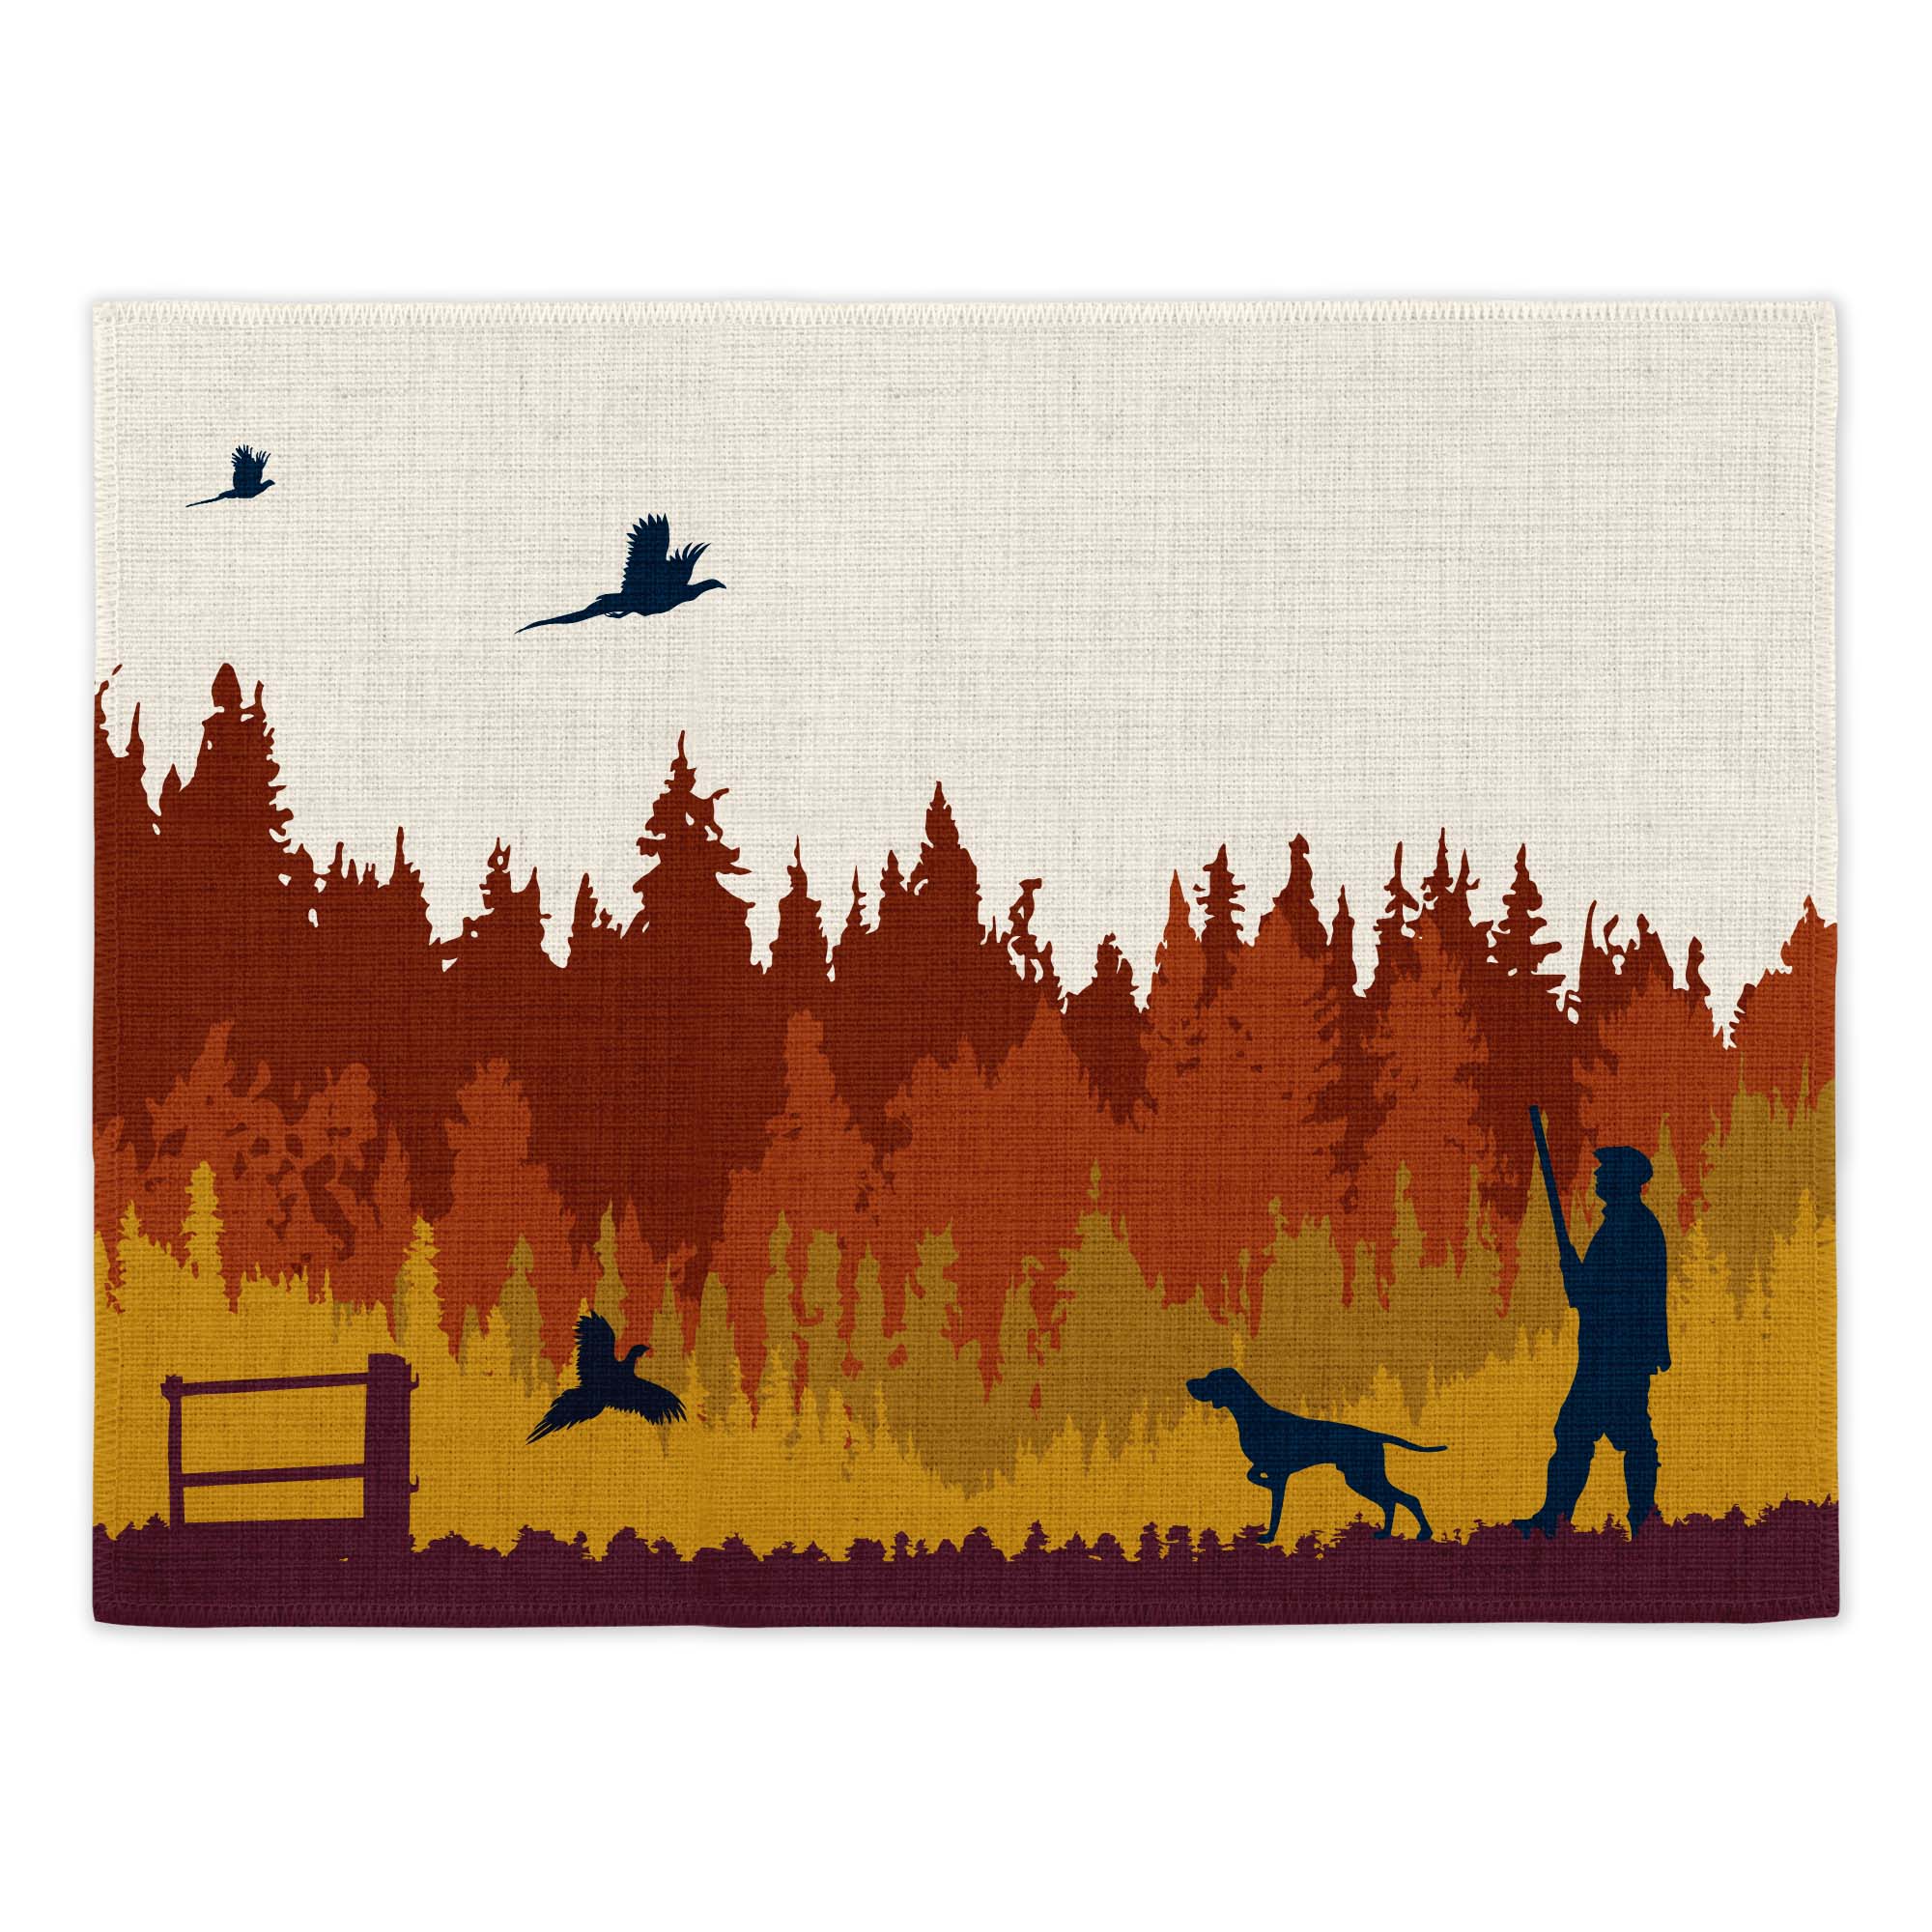 Autumn Shoot Fishing Placemats (Set of Four) Placemats Mustard and Gray Ltd Shropshire UK